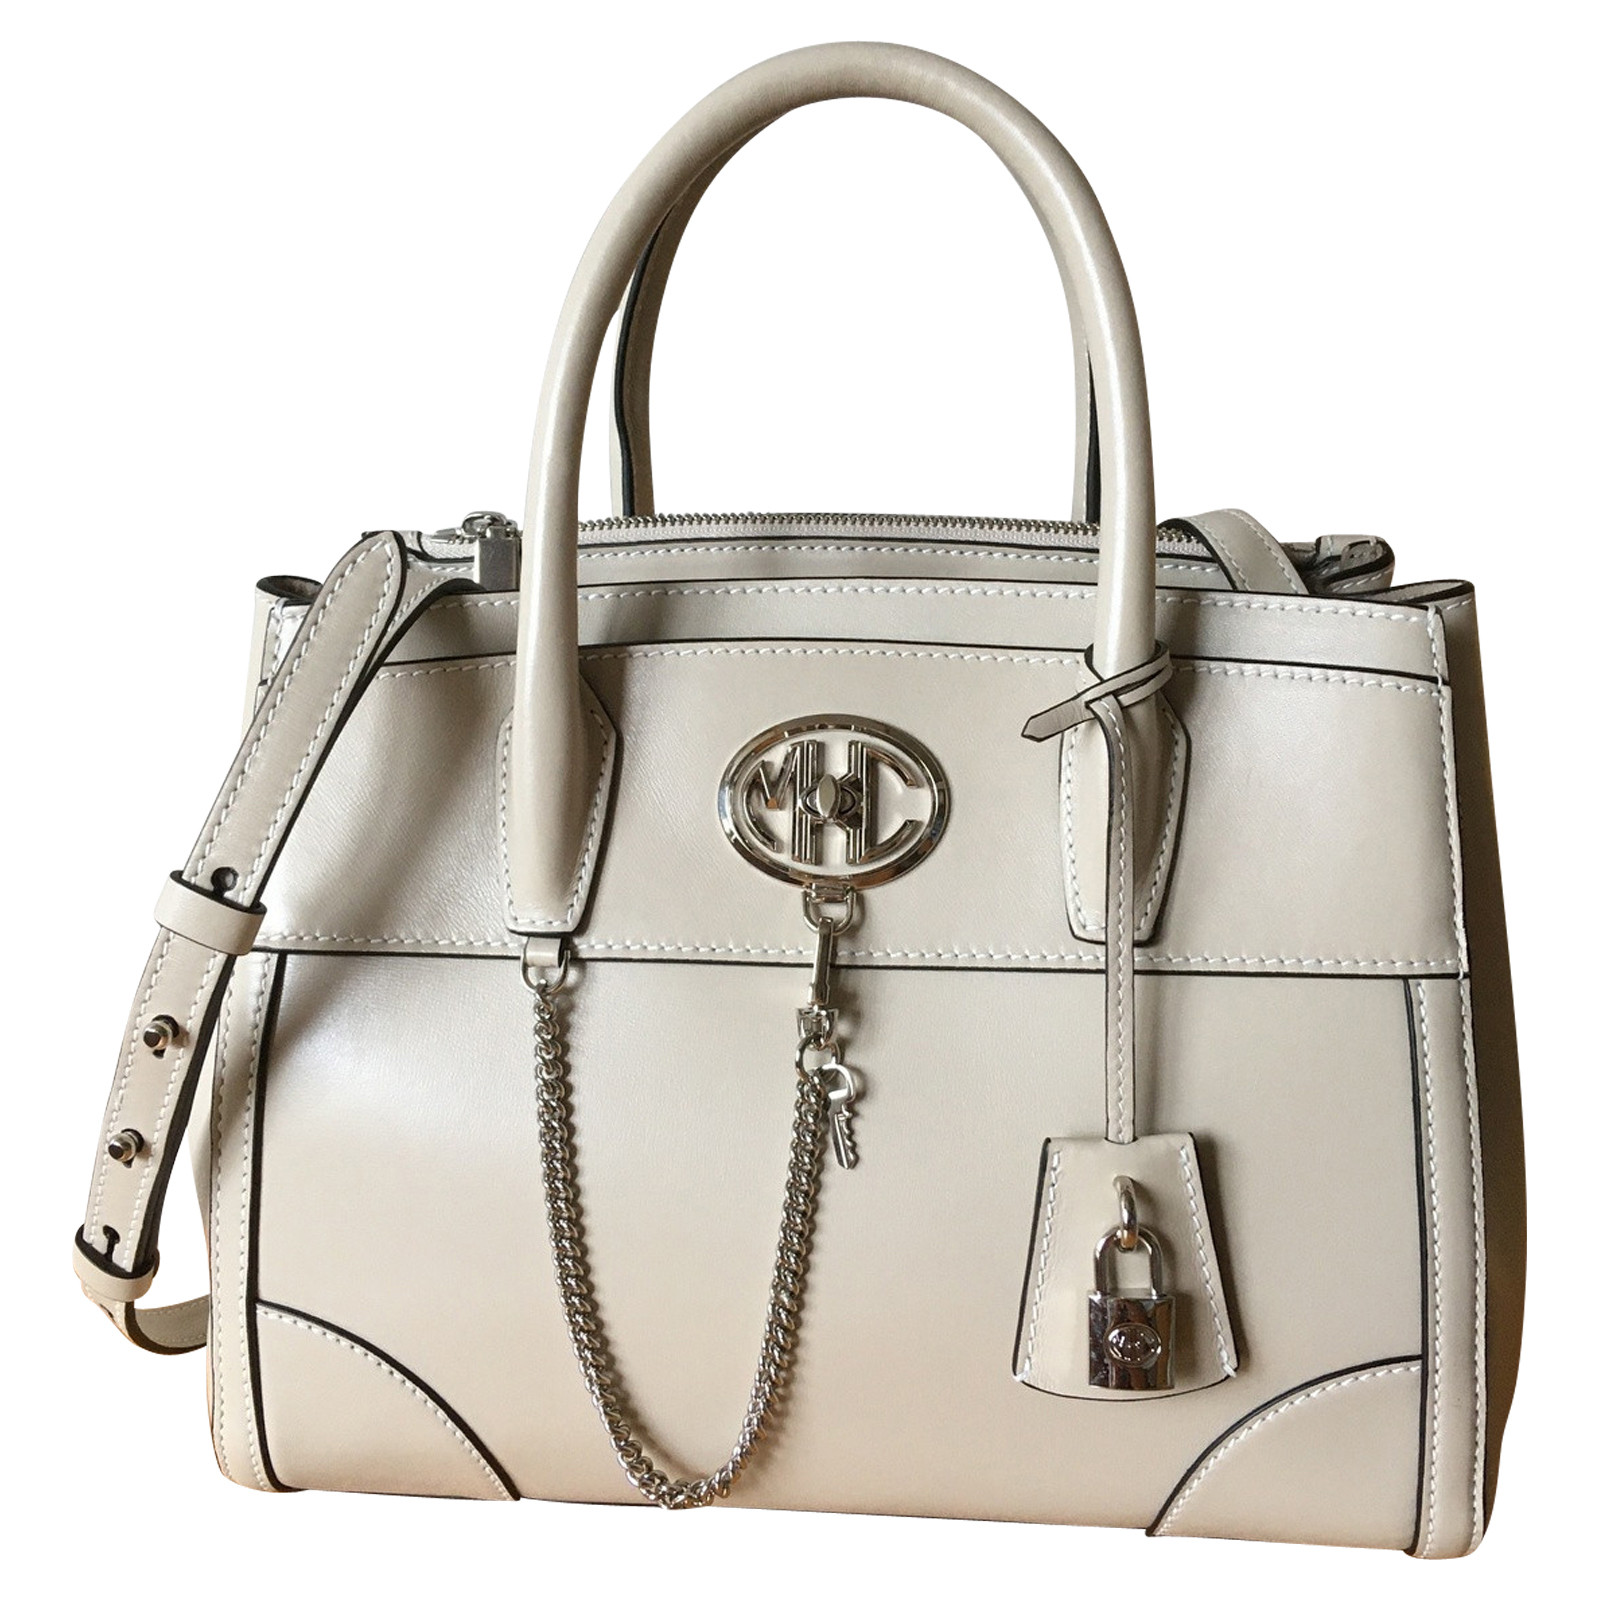 MICHAEL KORS Donna Borsa a tracolla in Pelle in Beige